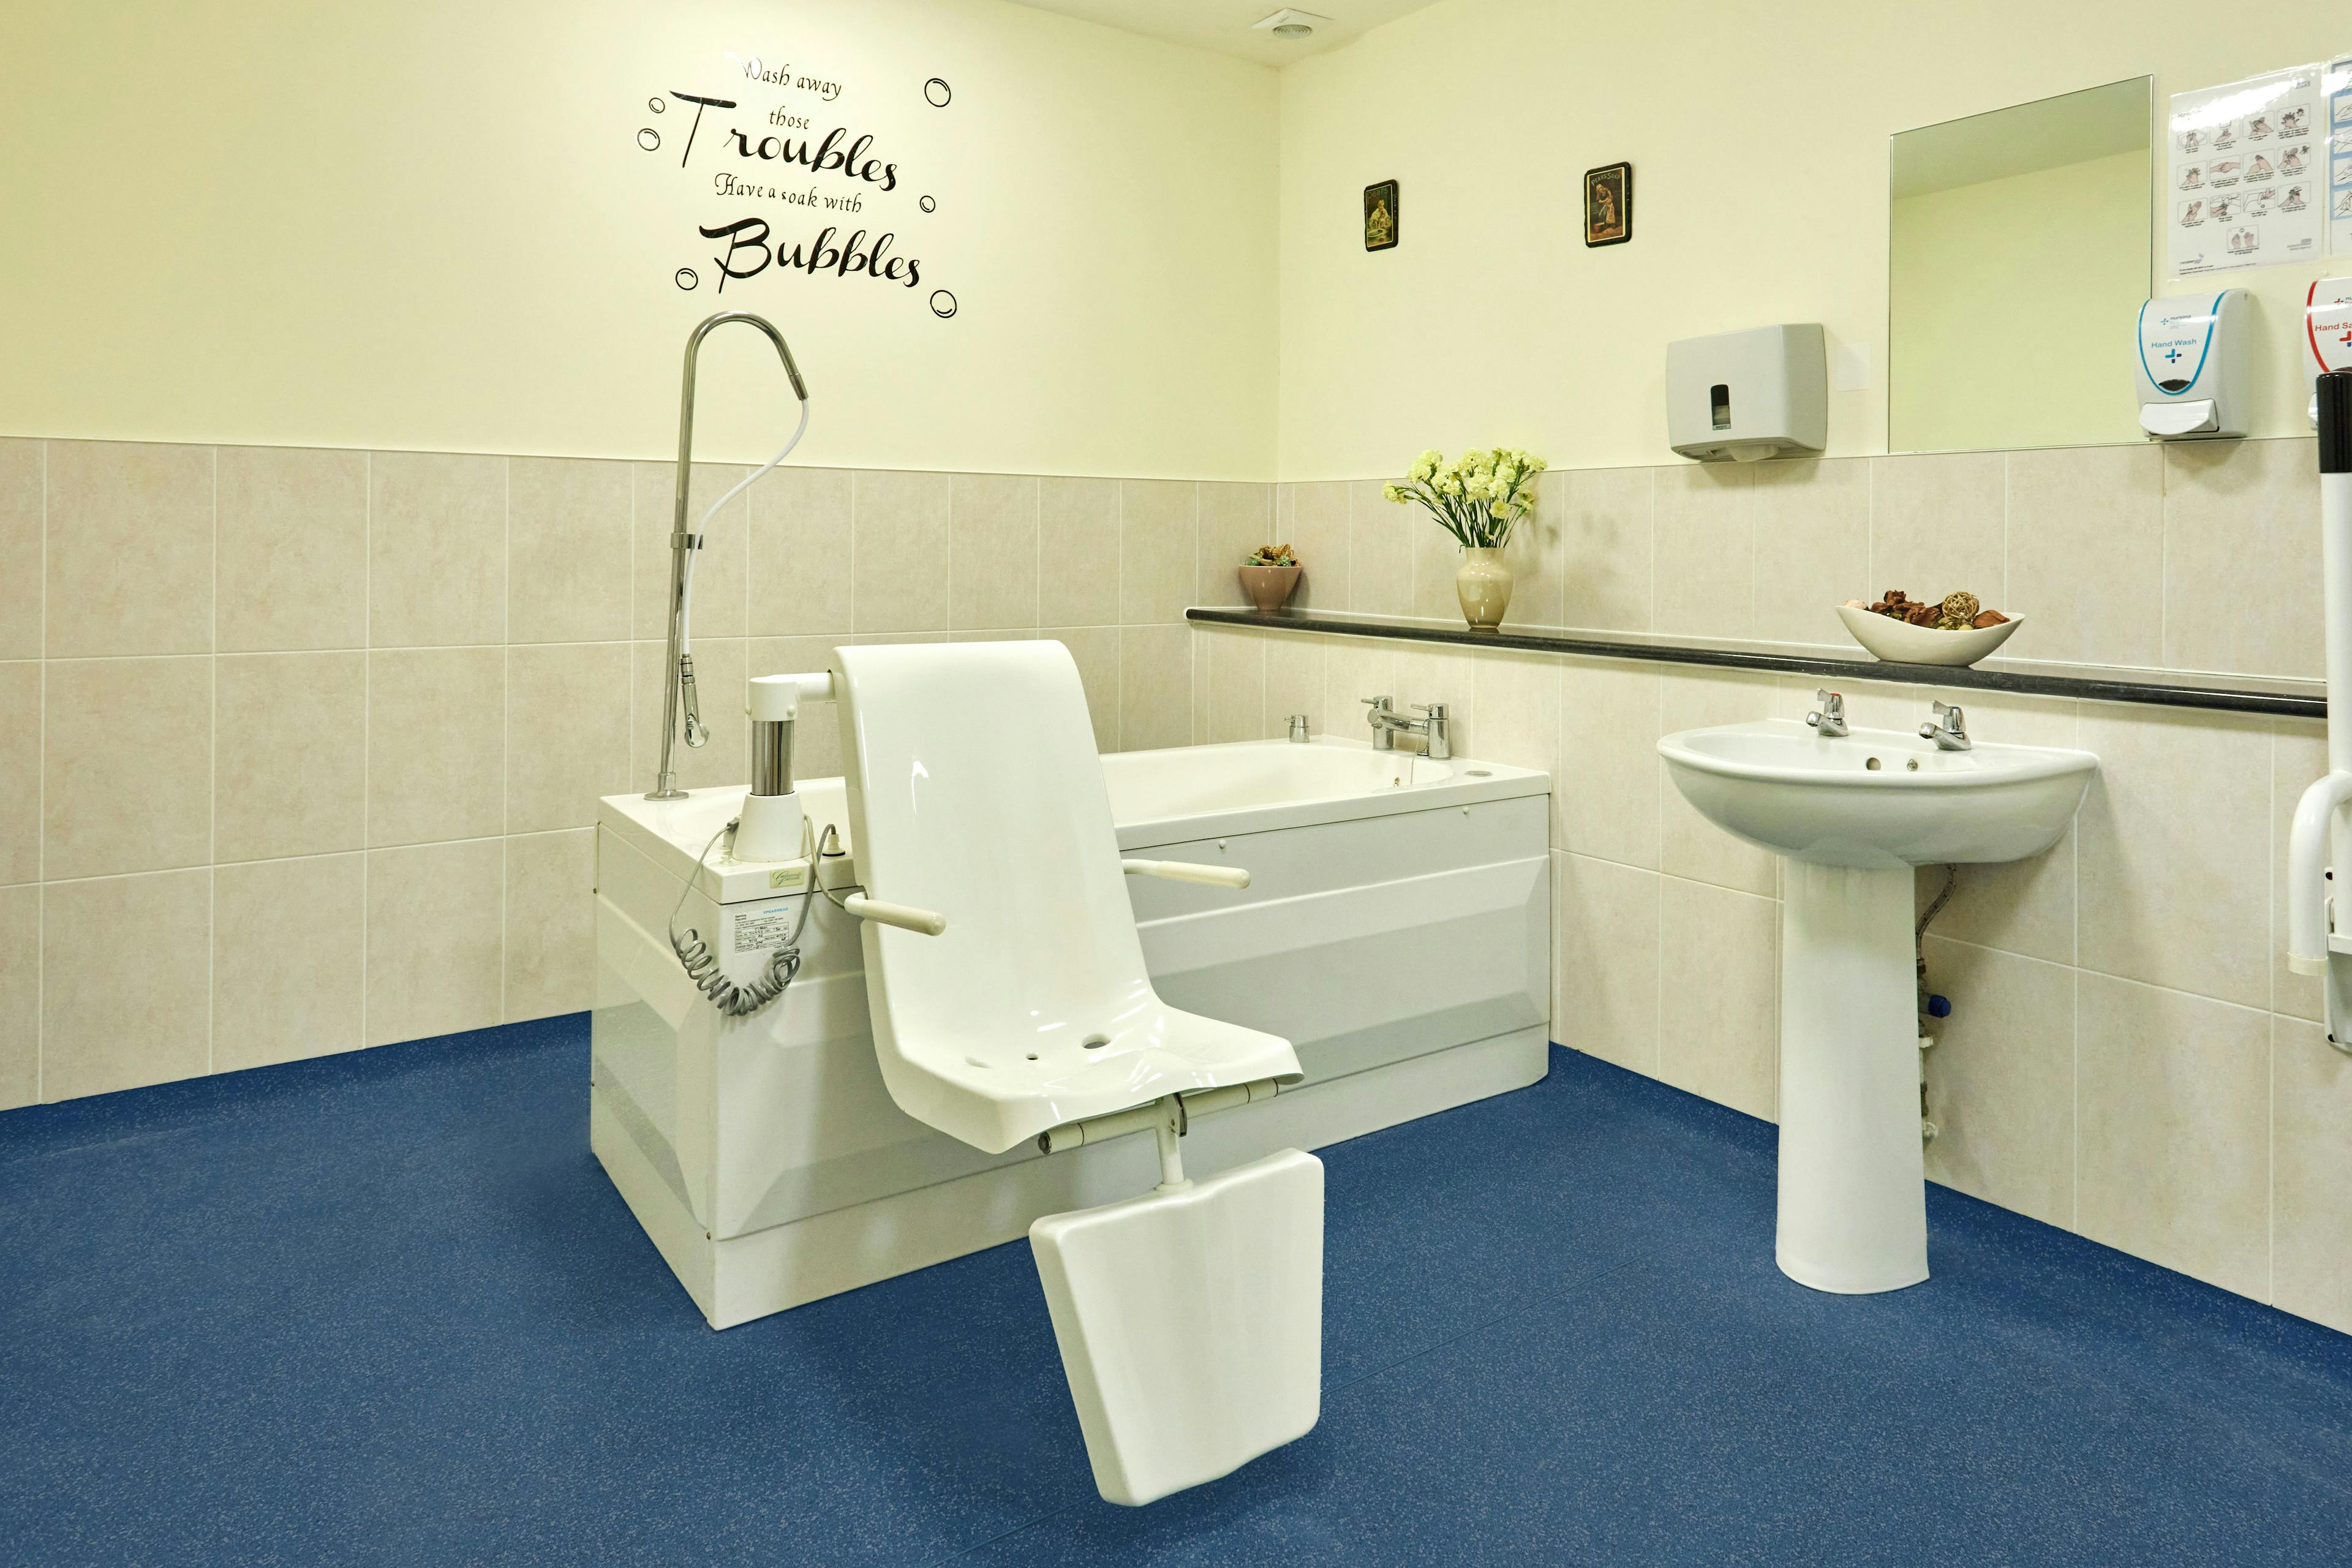 Bathroom at Solent Grange Care Home in Ryde, Isle of Wight